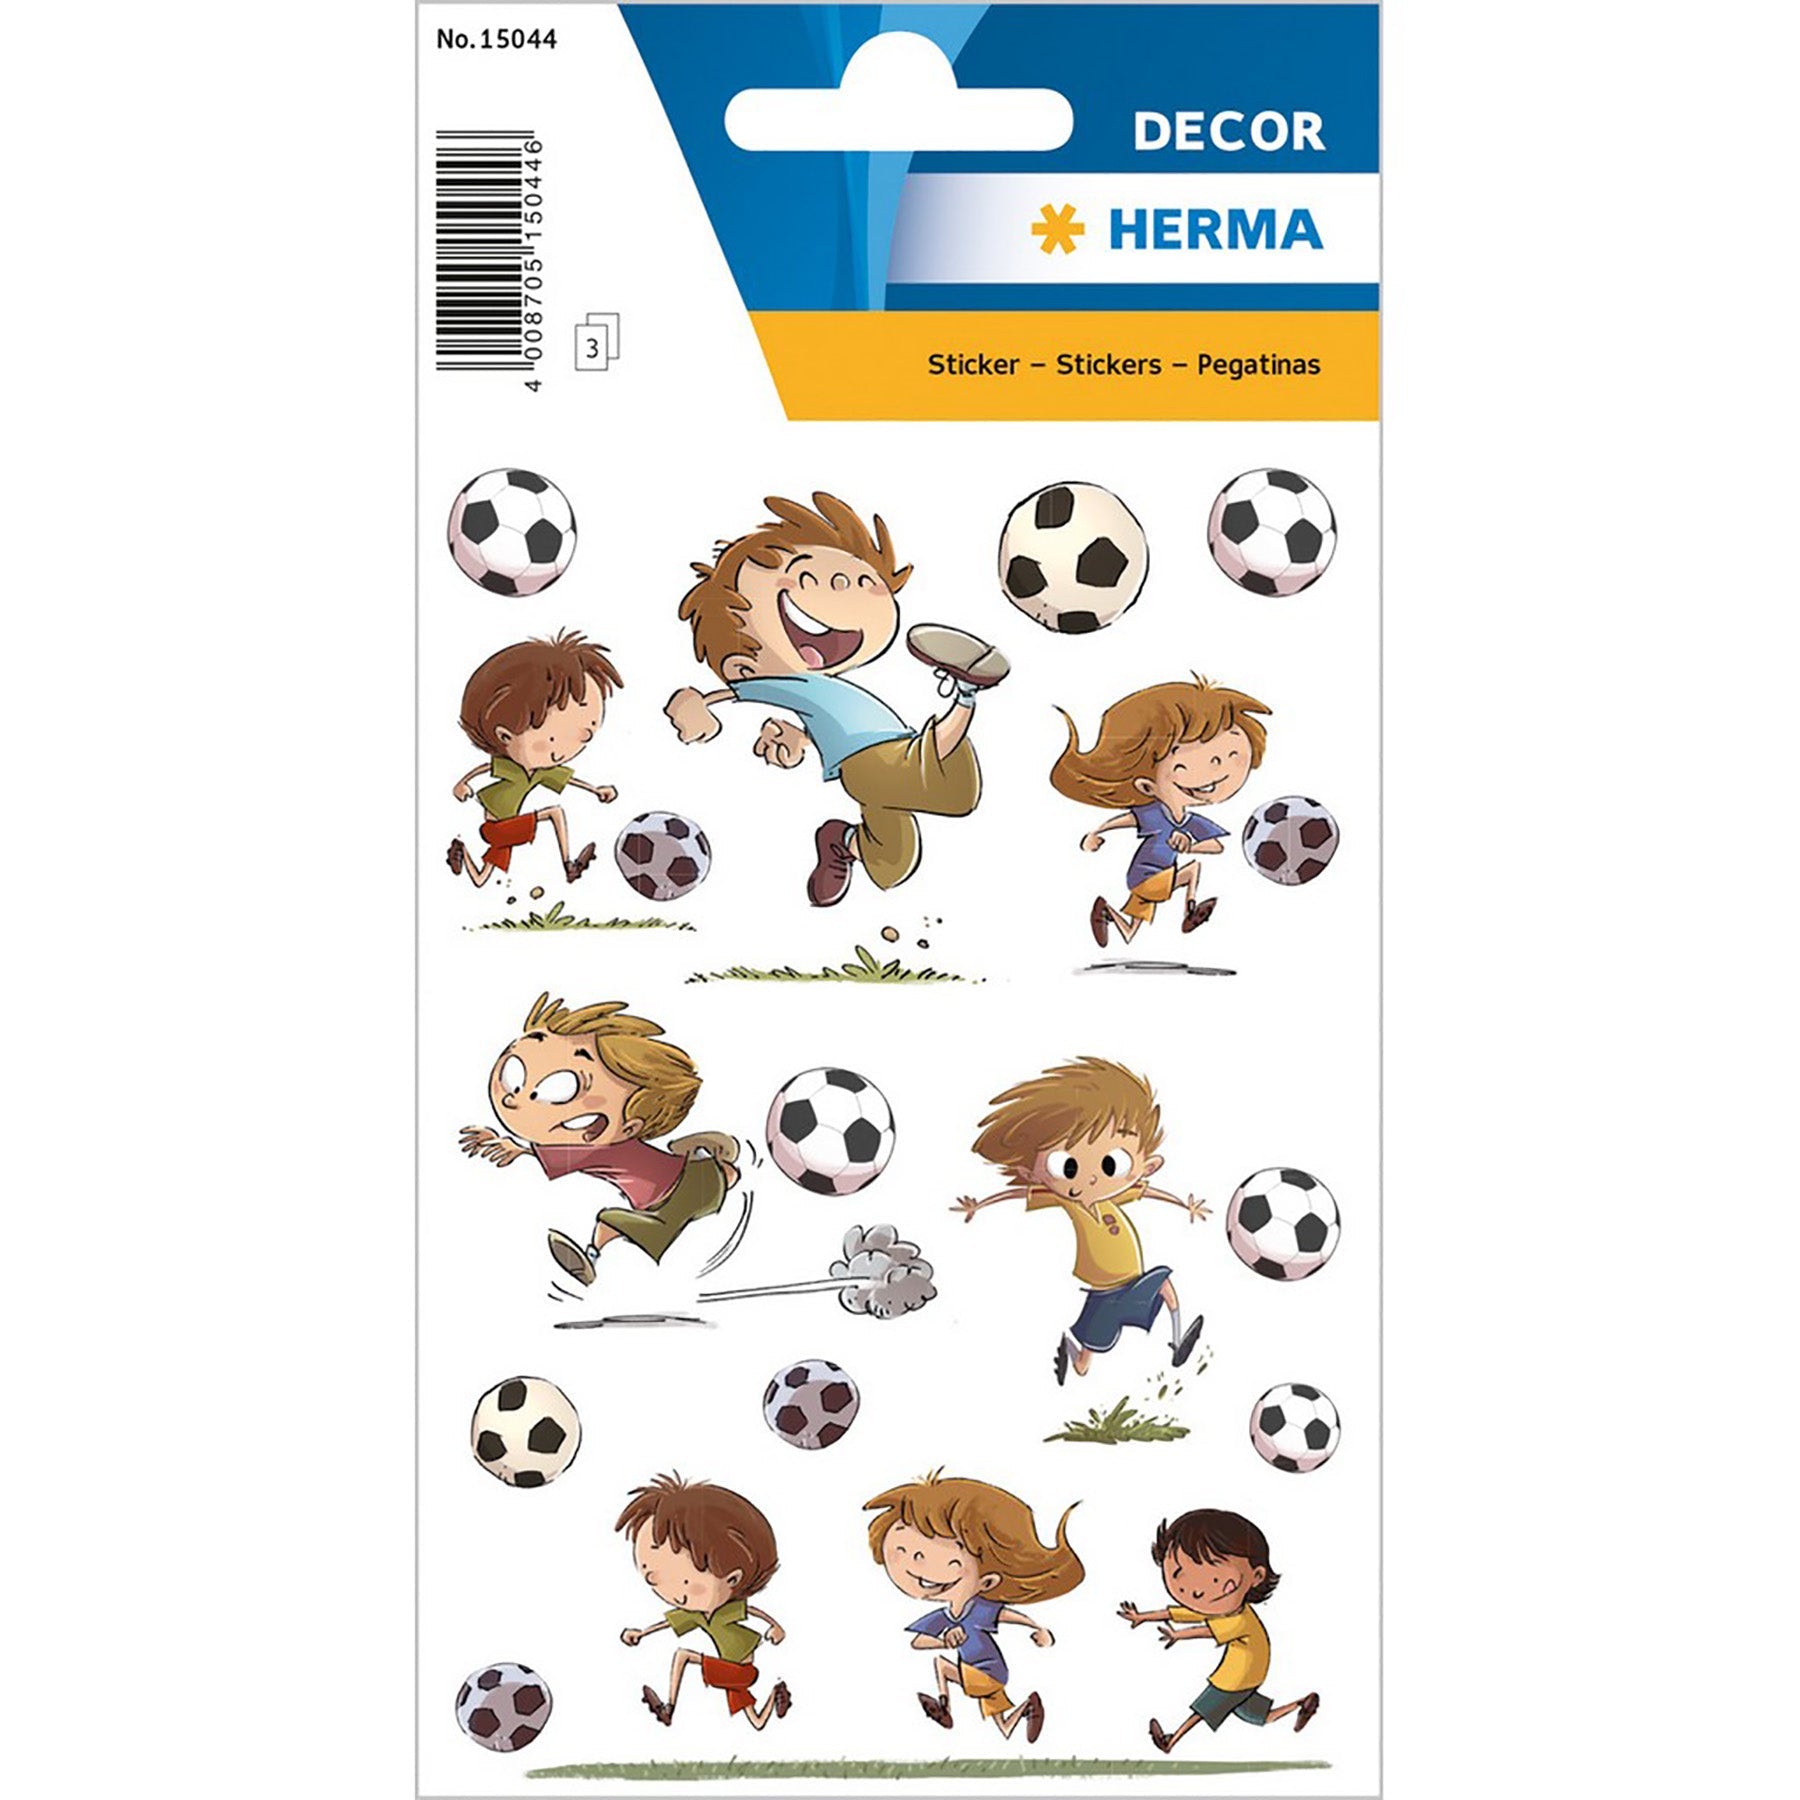 Herma Décor 3 Sheets Stickers Soccer Friends 4.75x3.1in Sheet